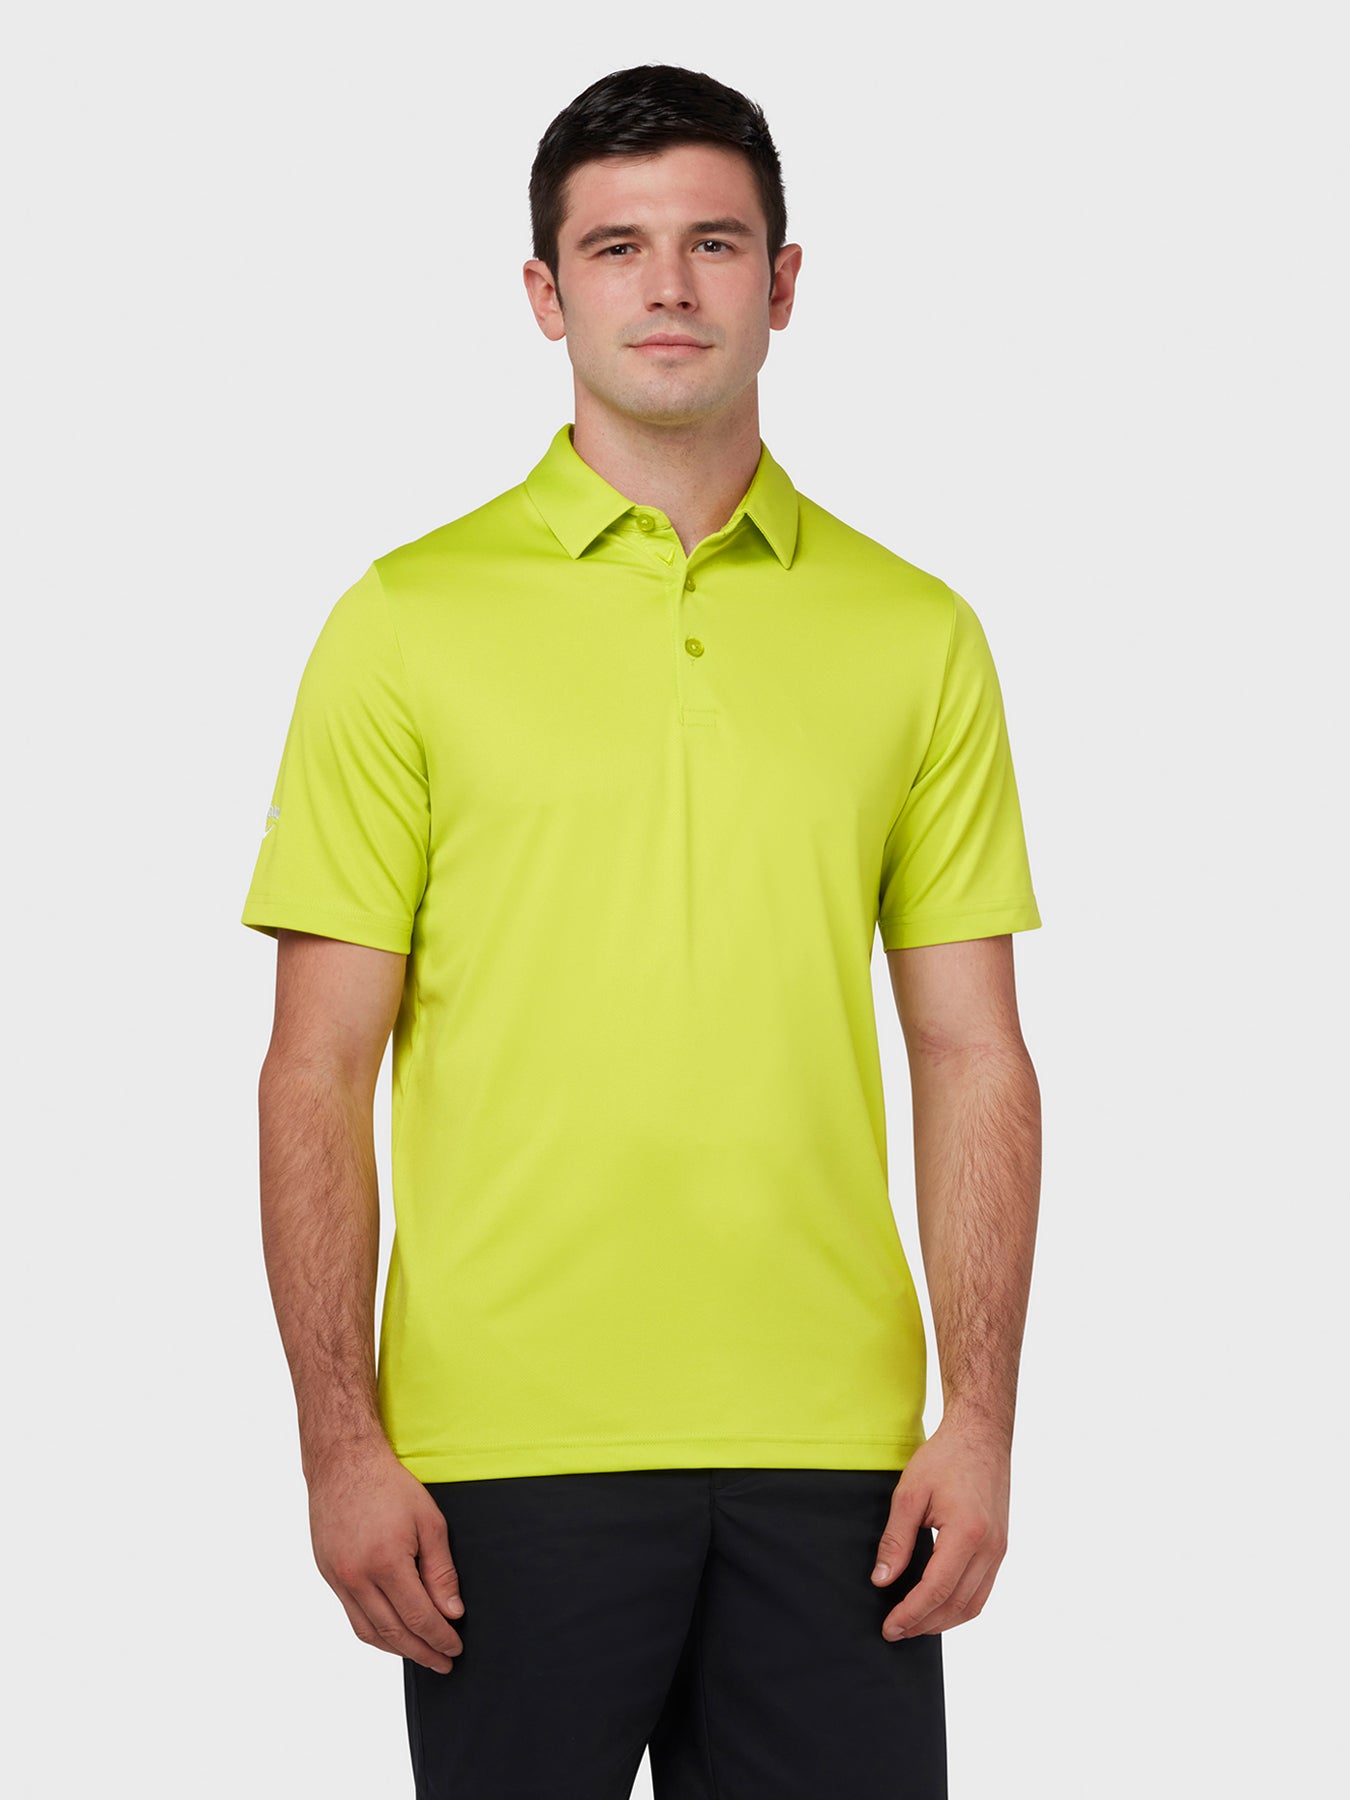 View Swing Tech Tour Polo In Surreal Green information